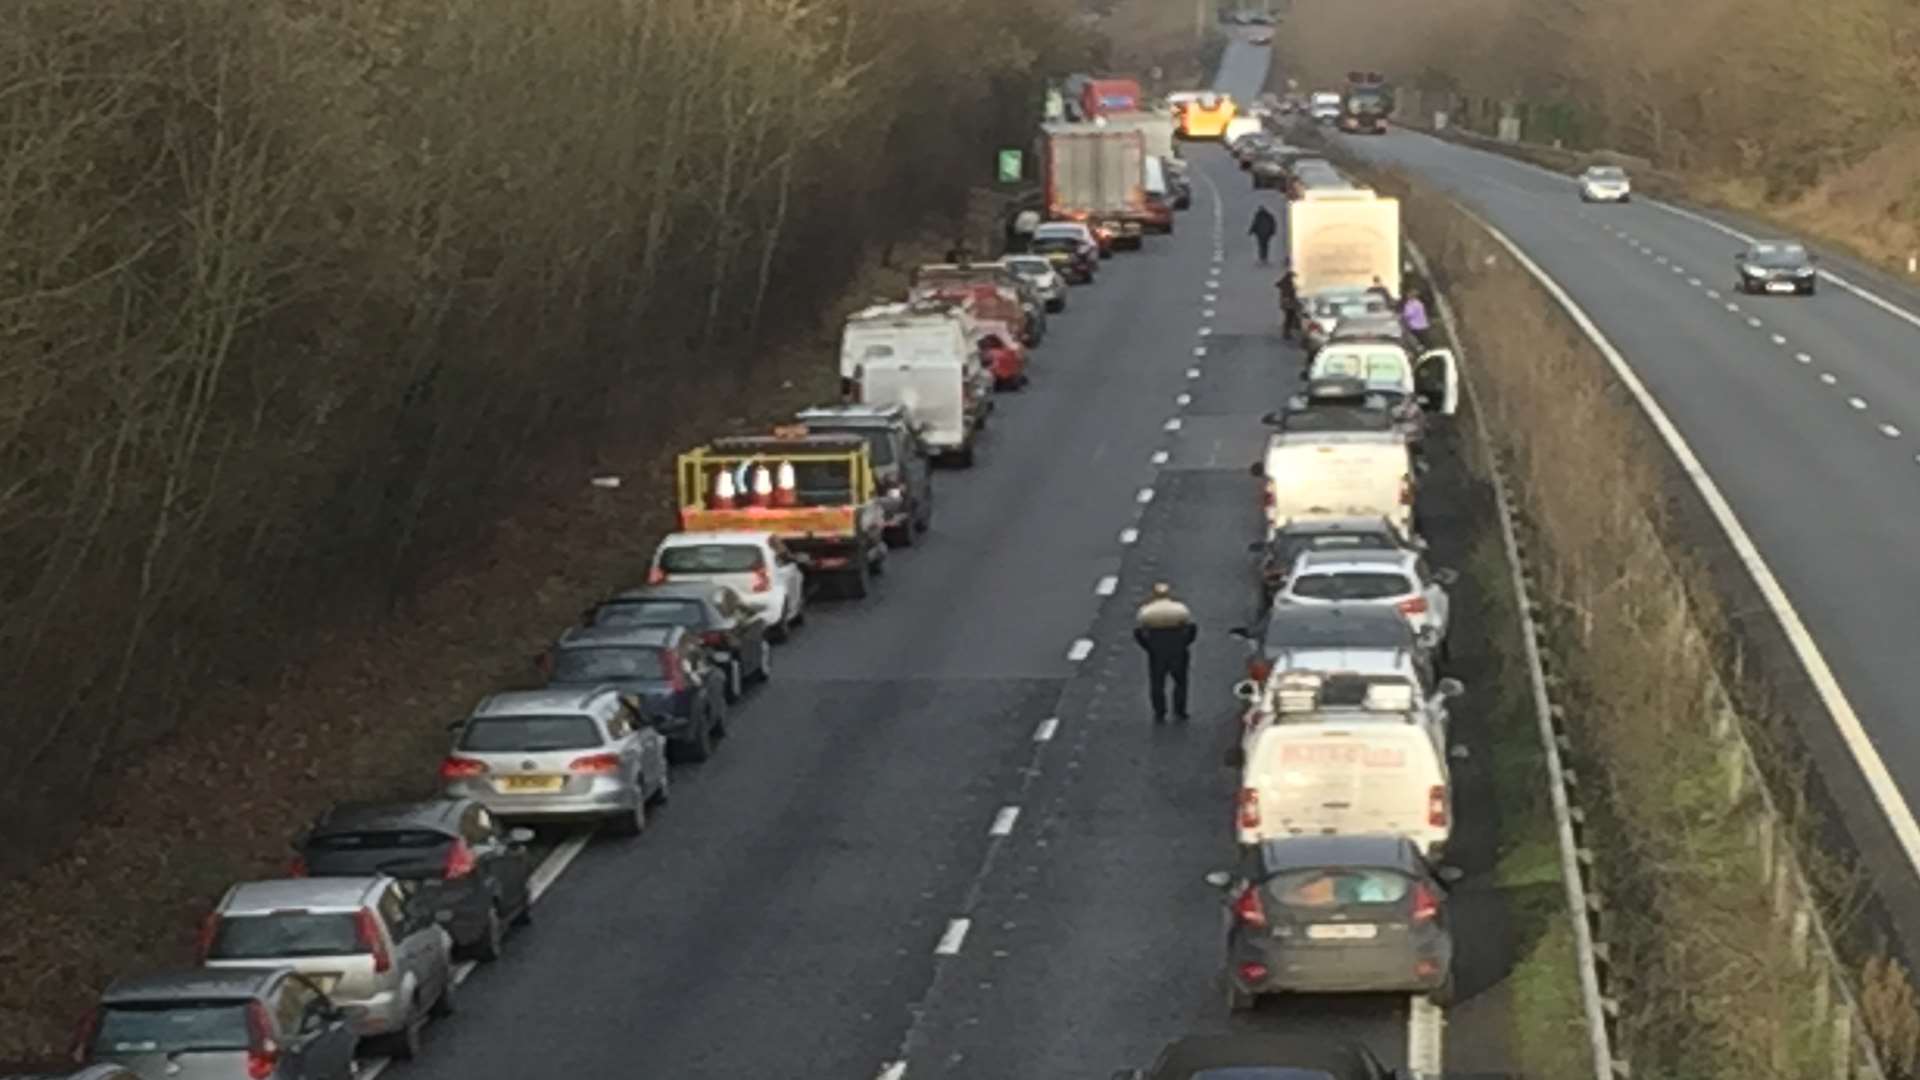 The traffic was queuing for miles after the crash which left Ivan Taylor seriously injured.